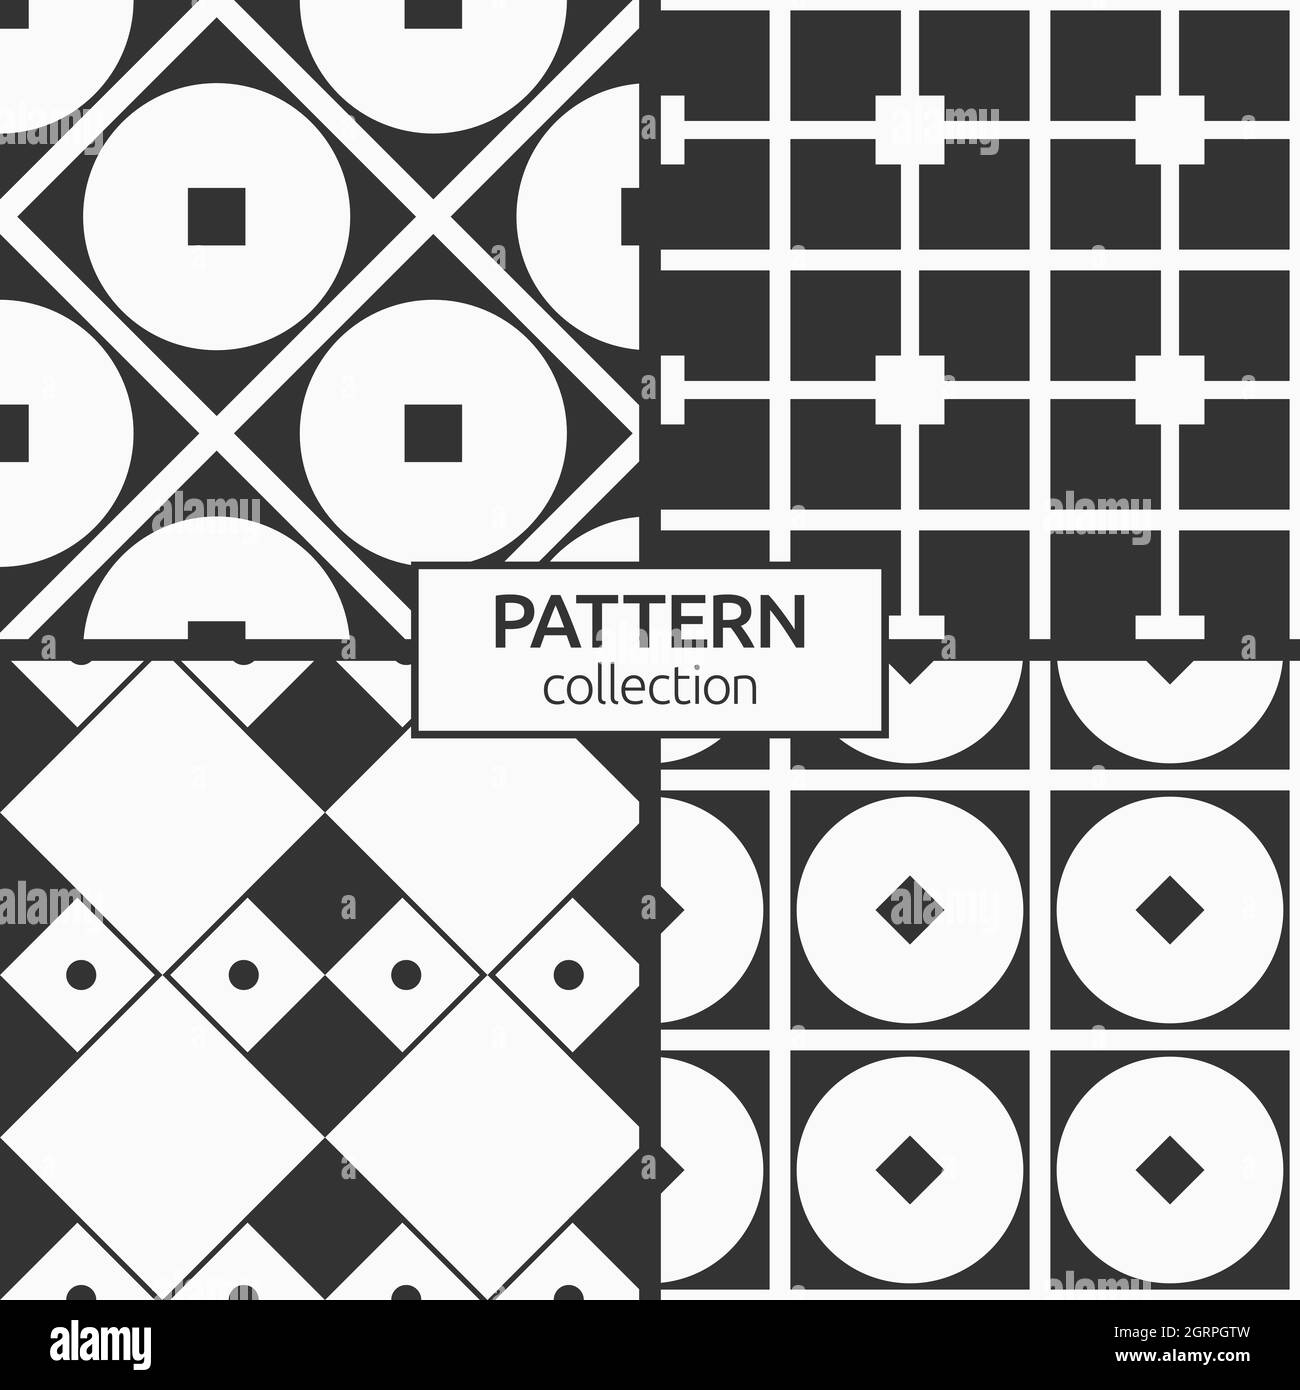 Seamless pattern vector black and white geometric textures. Simple shapes  background repeat designs. Stock Vector